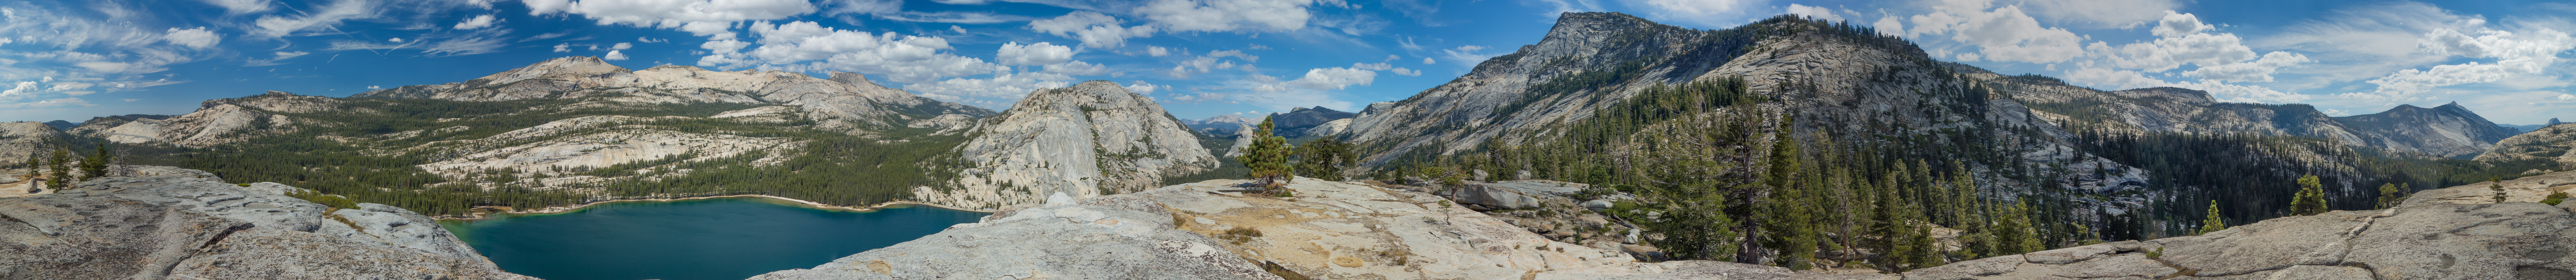 (l to r): Mt. Hoffman, Tuolumne Peak, Polly Dome, Pywiack Dome (behind the tree), Medlicott Dome, and Tenaya Peak.  At the far right is Clouds Rest.